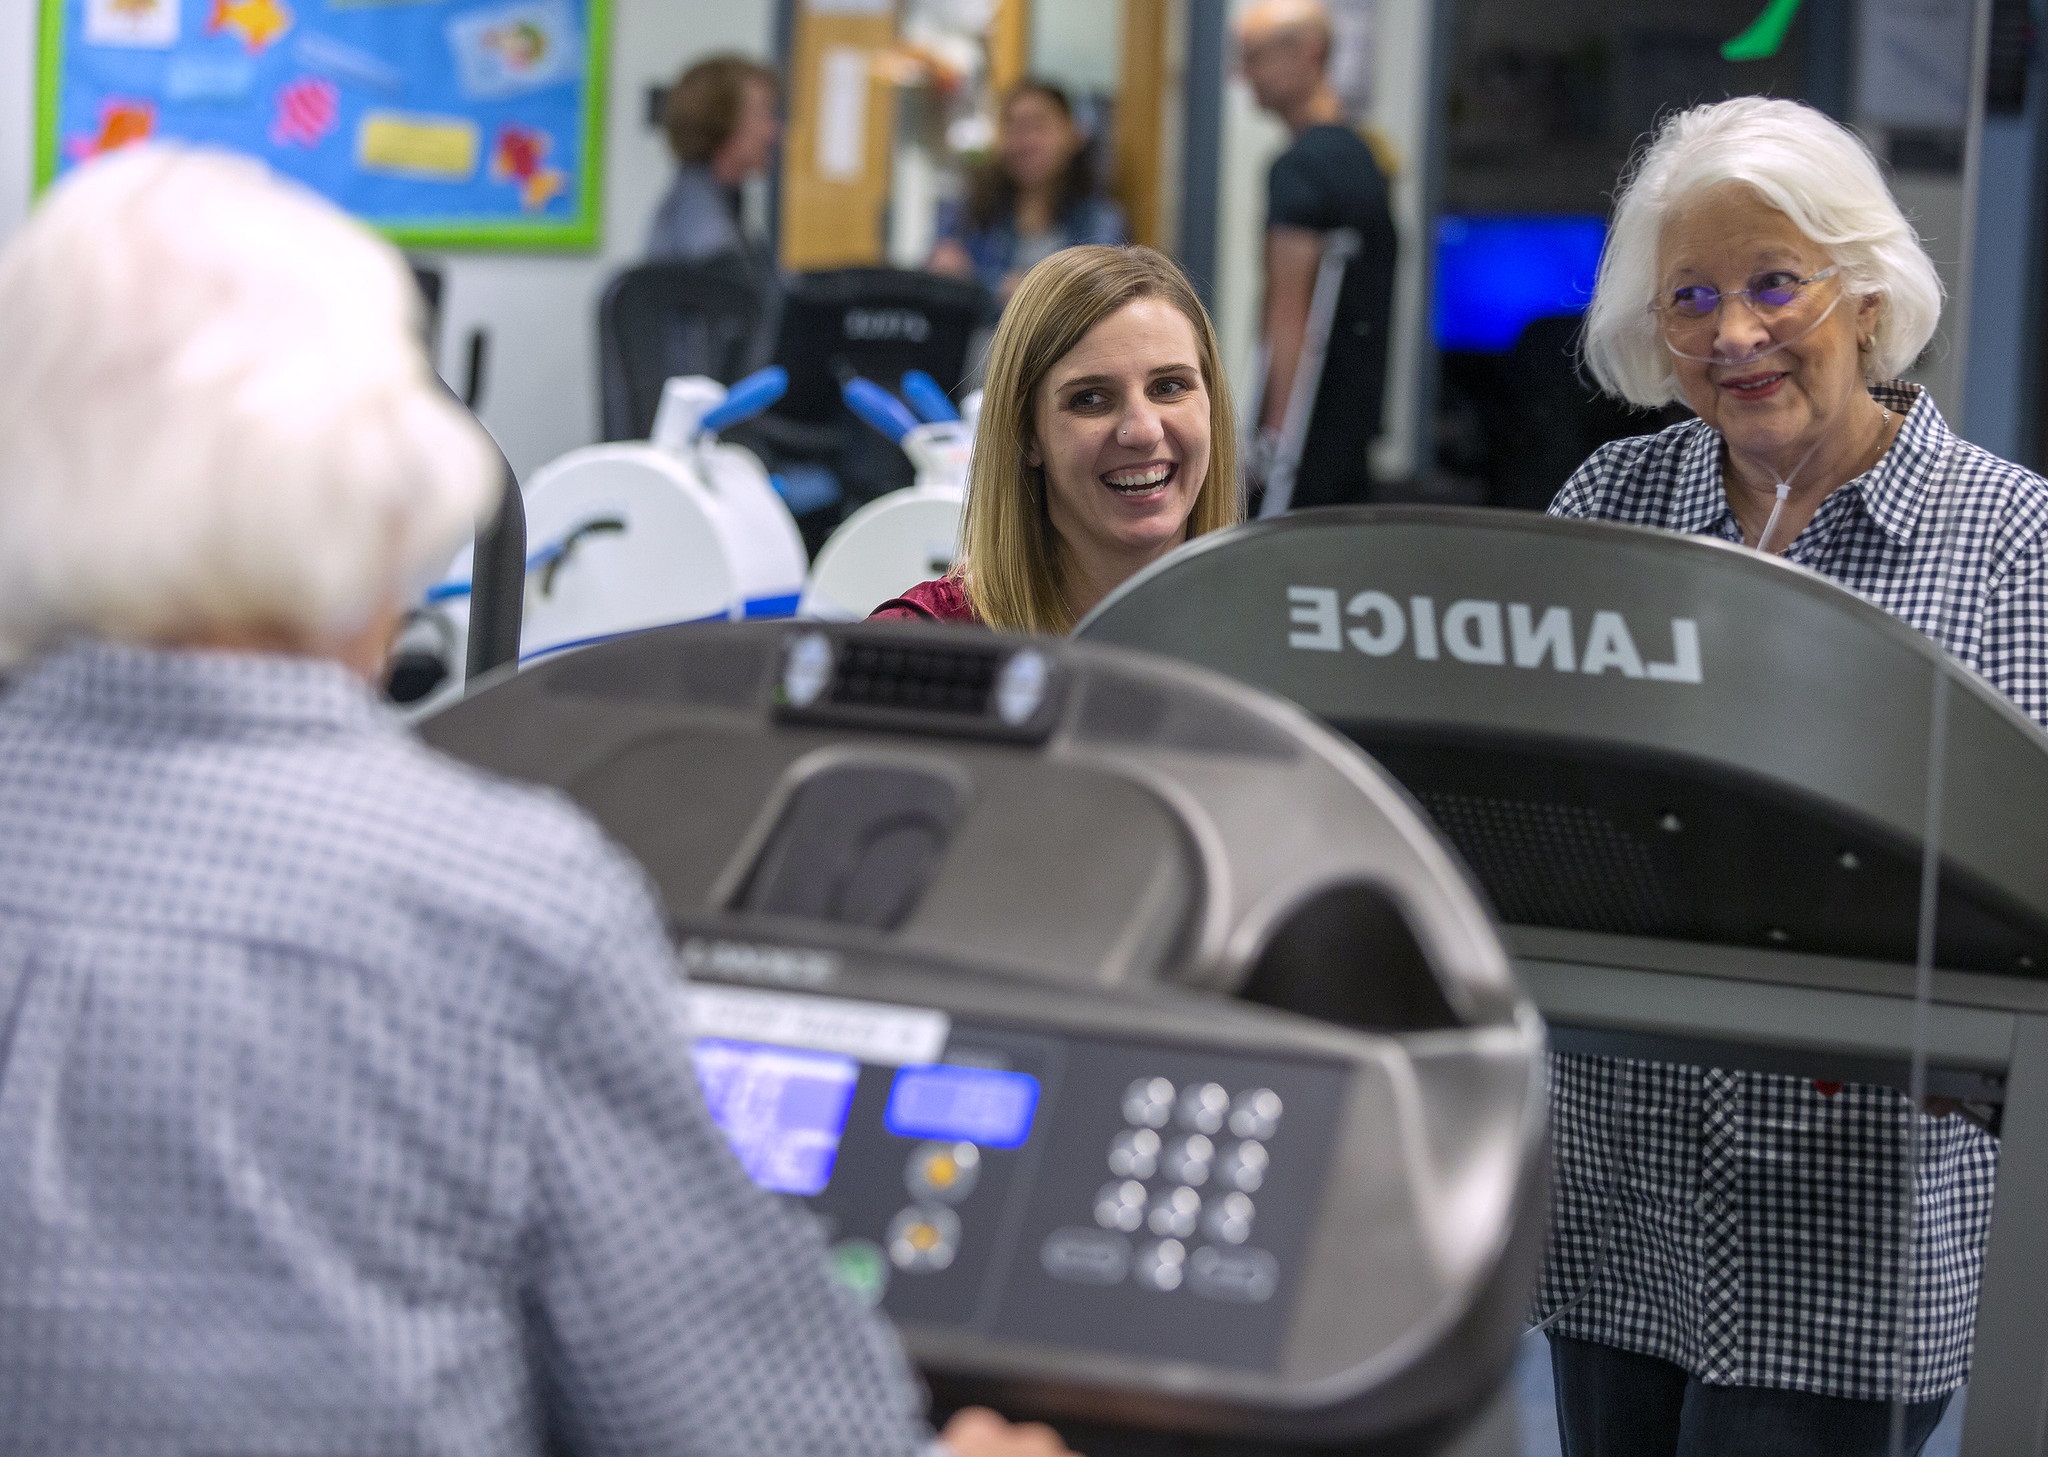 A young woman smiles as an older woman wearing a nasal cannula and a checkered dress and standing on a treadmill. They are in the Health and Wellness Center on the Hershey Medical Center campus. Three people are standing behind them out of focus.